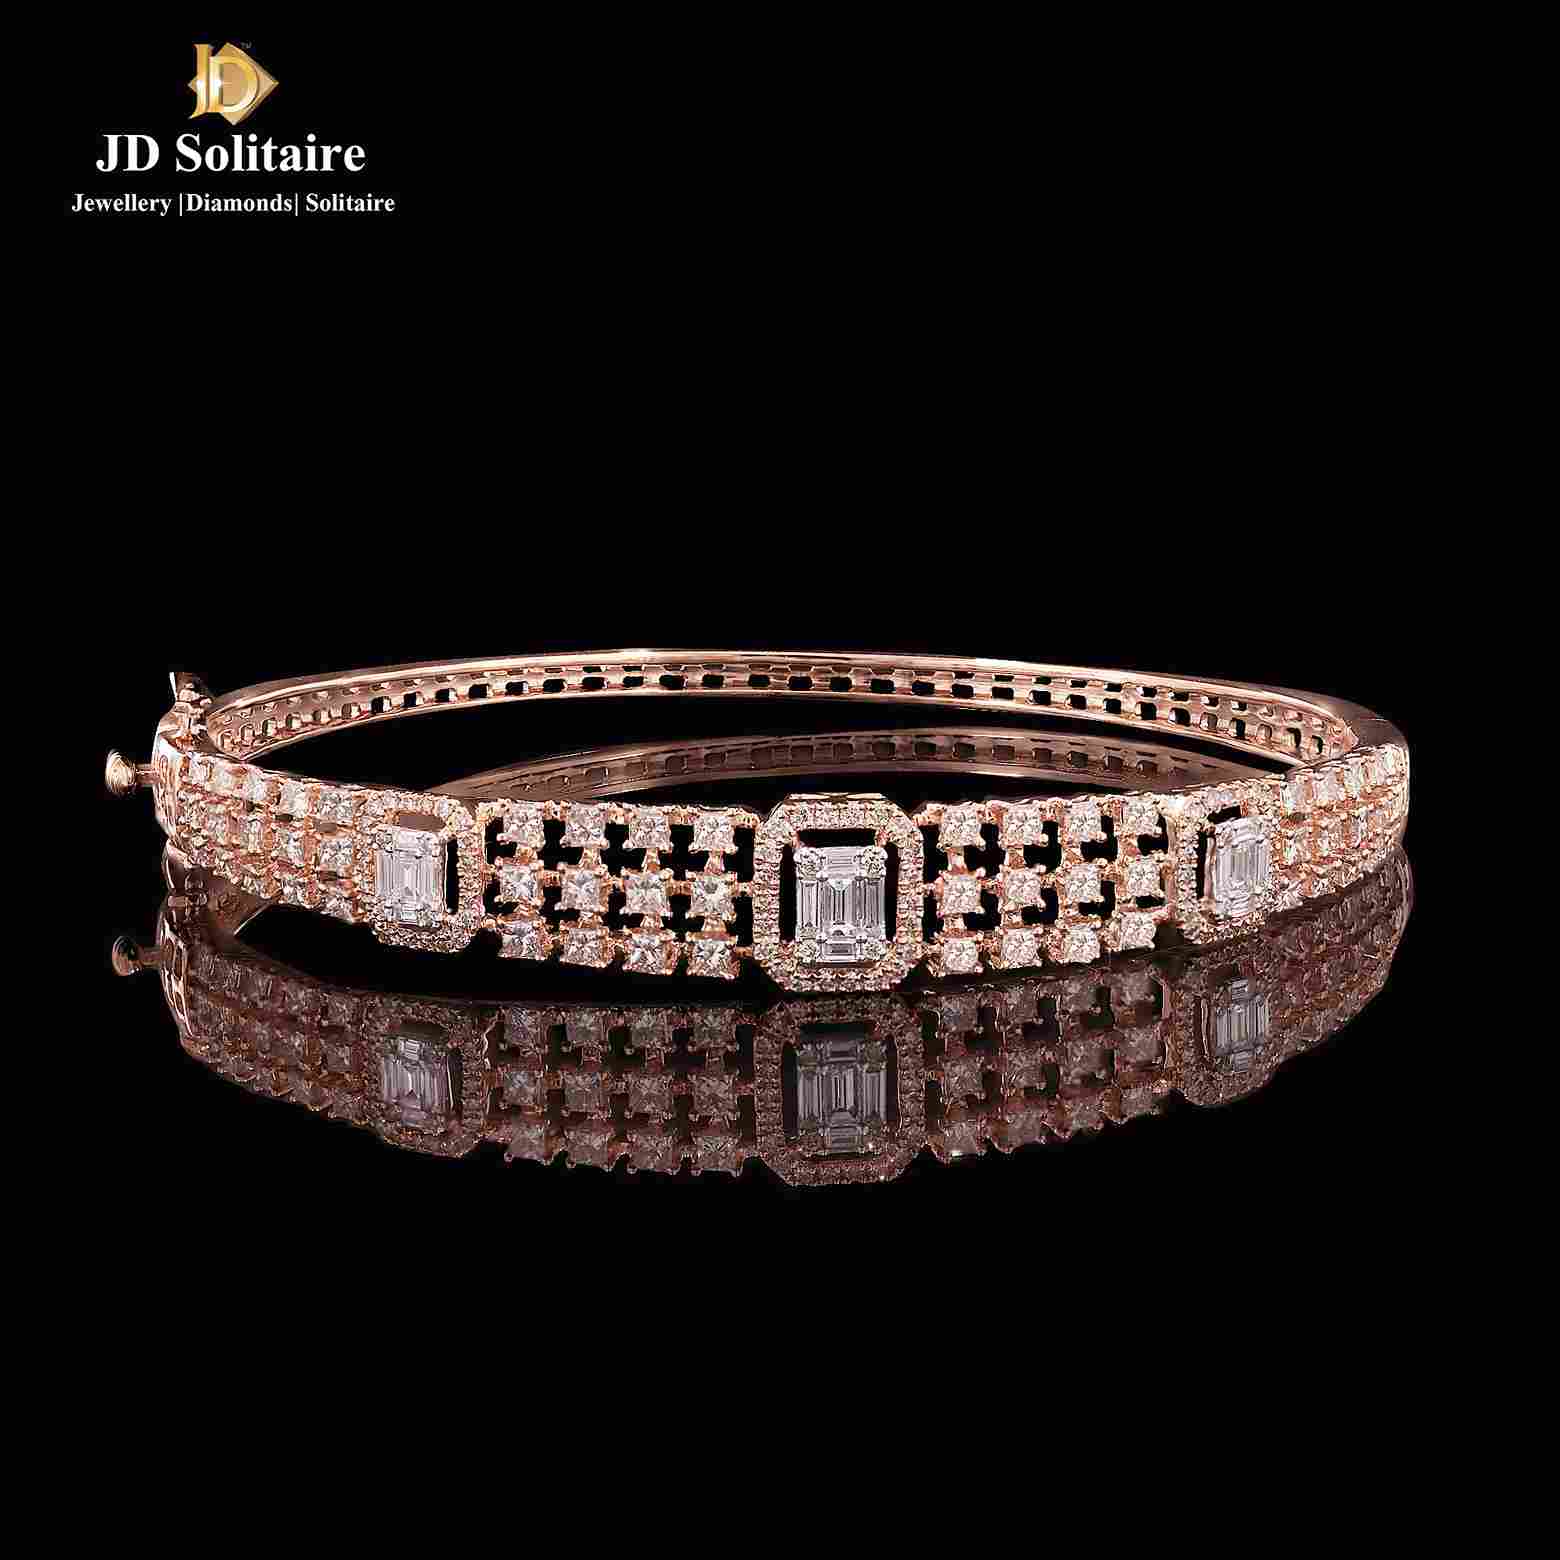 Heart Shape With Diamond Lovely Design Gold Plated Bracelet For Ladies -  Style A289 – Soni Fashion®